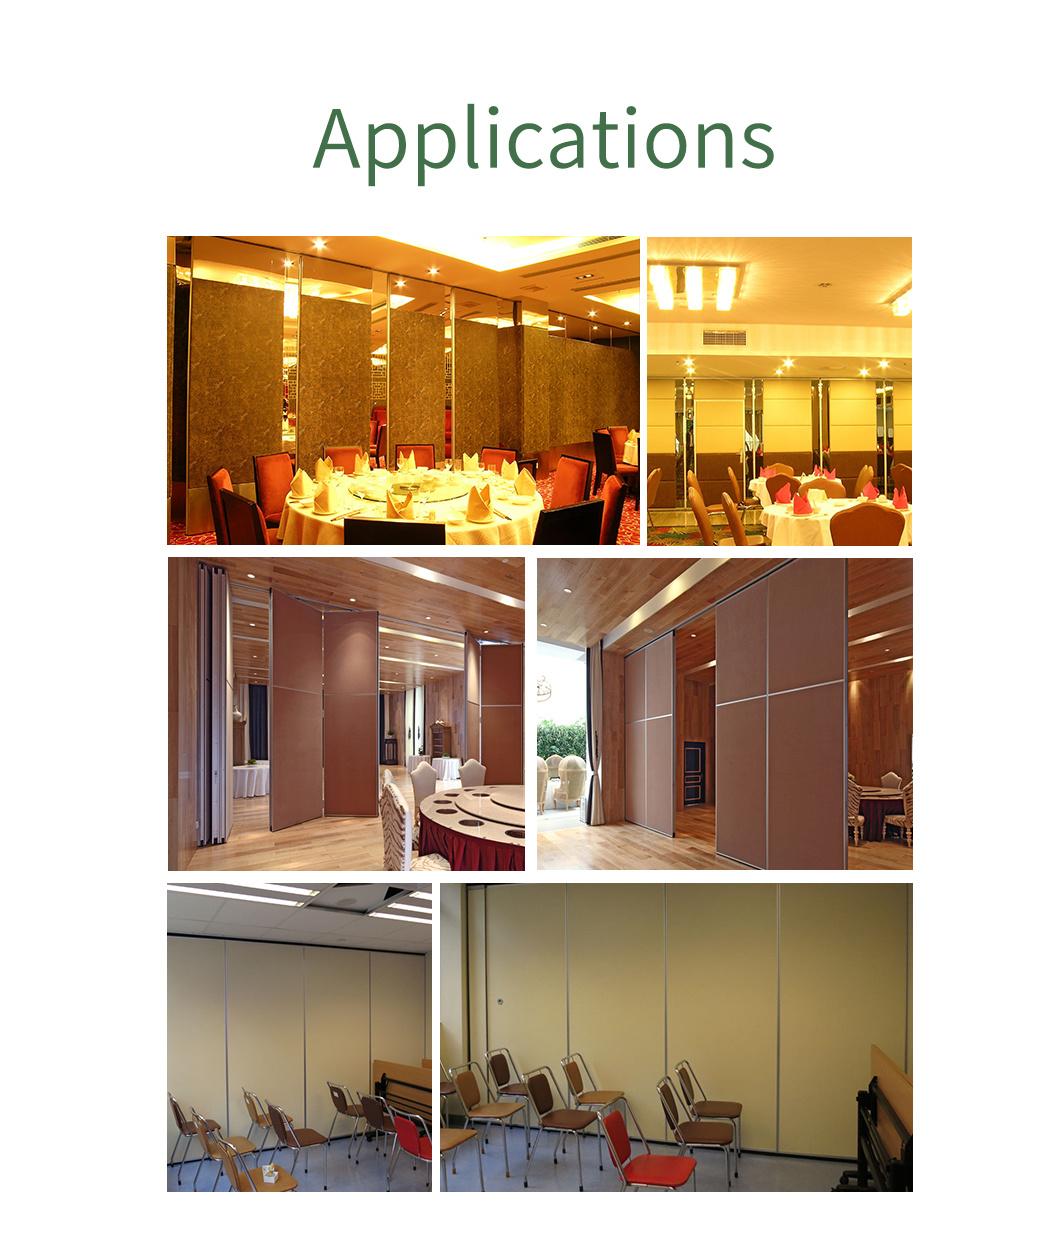 Eco Friendly Sound Acoustic High Sound Insulation Mobile Movable Partition Walls Conference Room for Office